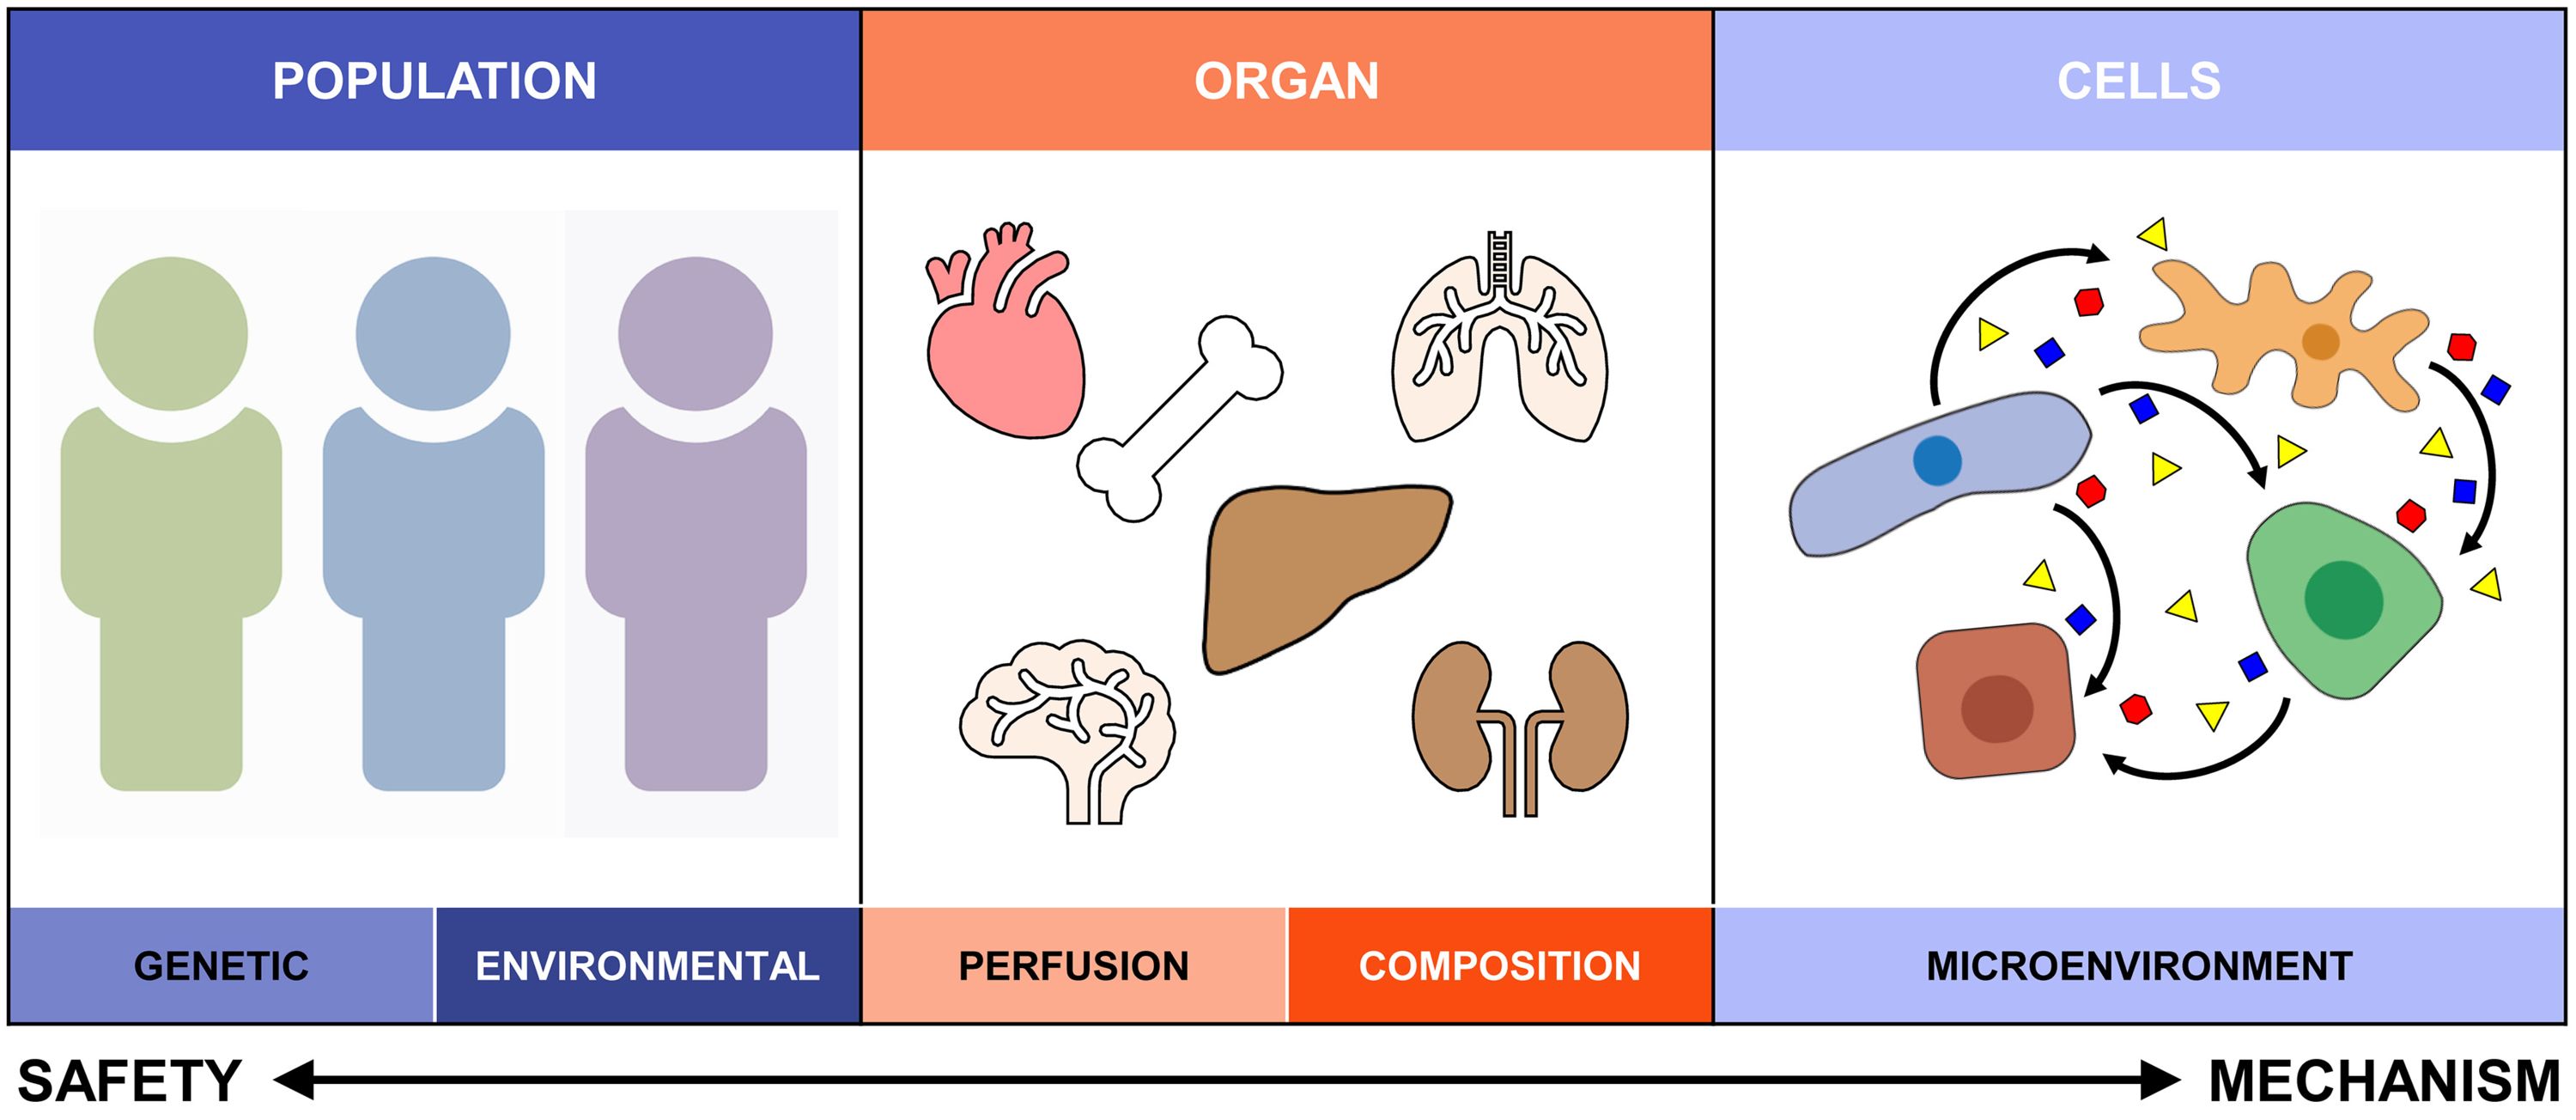 Representation showing diversity of organ and liver cells